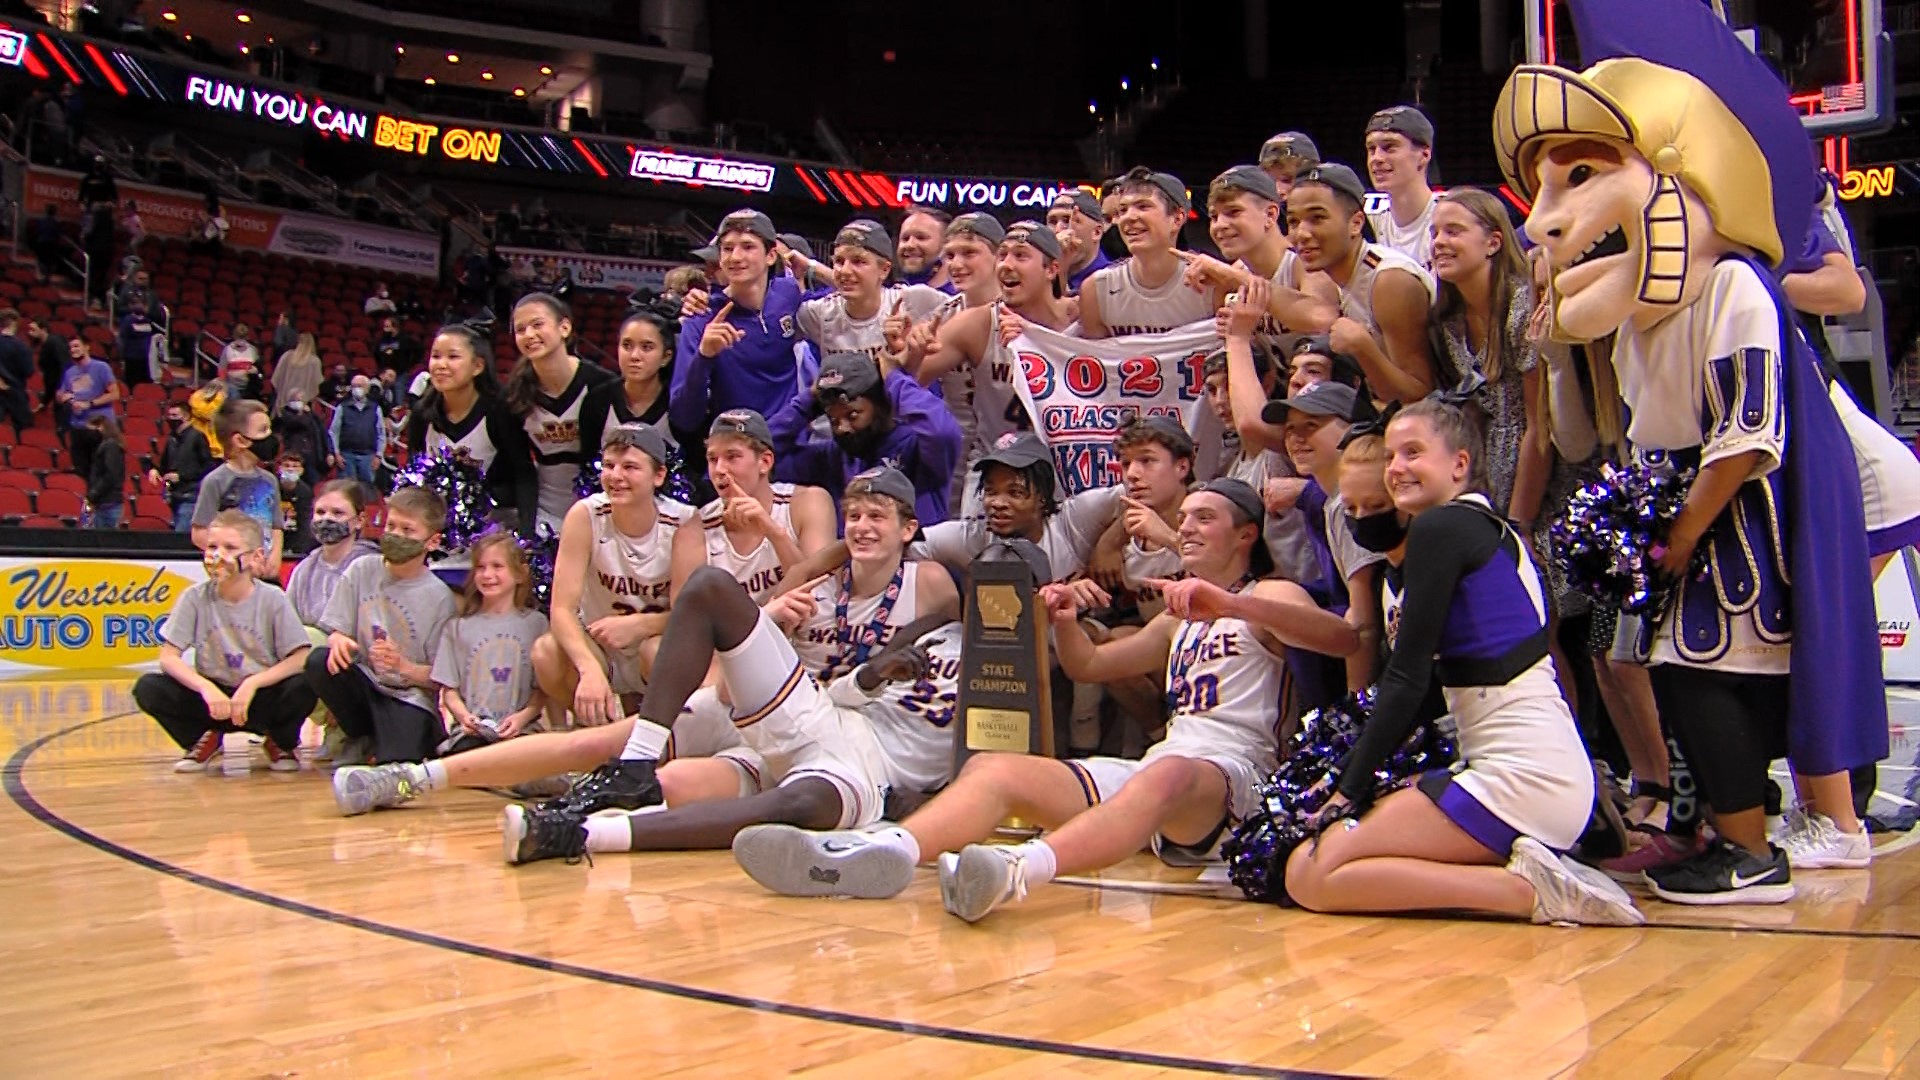 The Waukee Warriors trailed by double-digits in the first quarter only to come back and top the Johnston Dragons 61-50 to win Waukee's first state title.